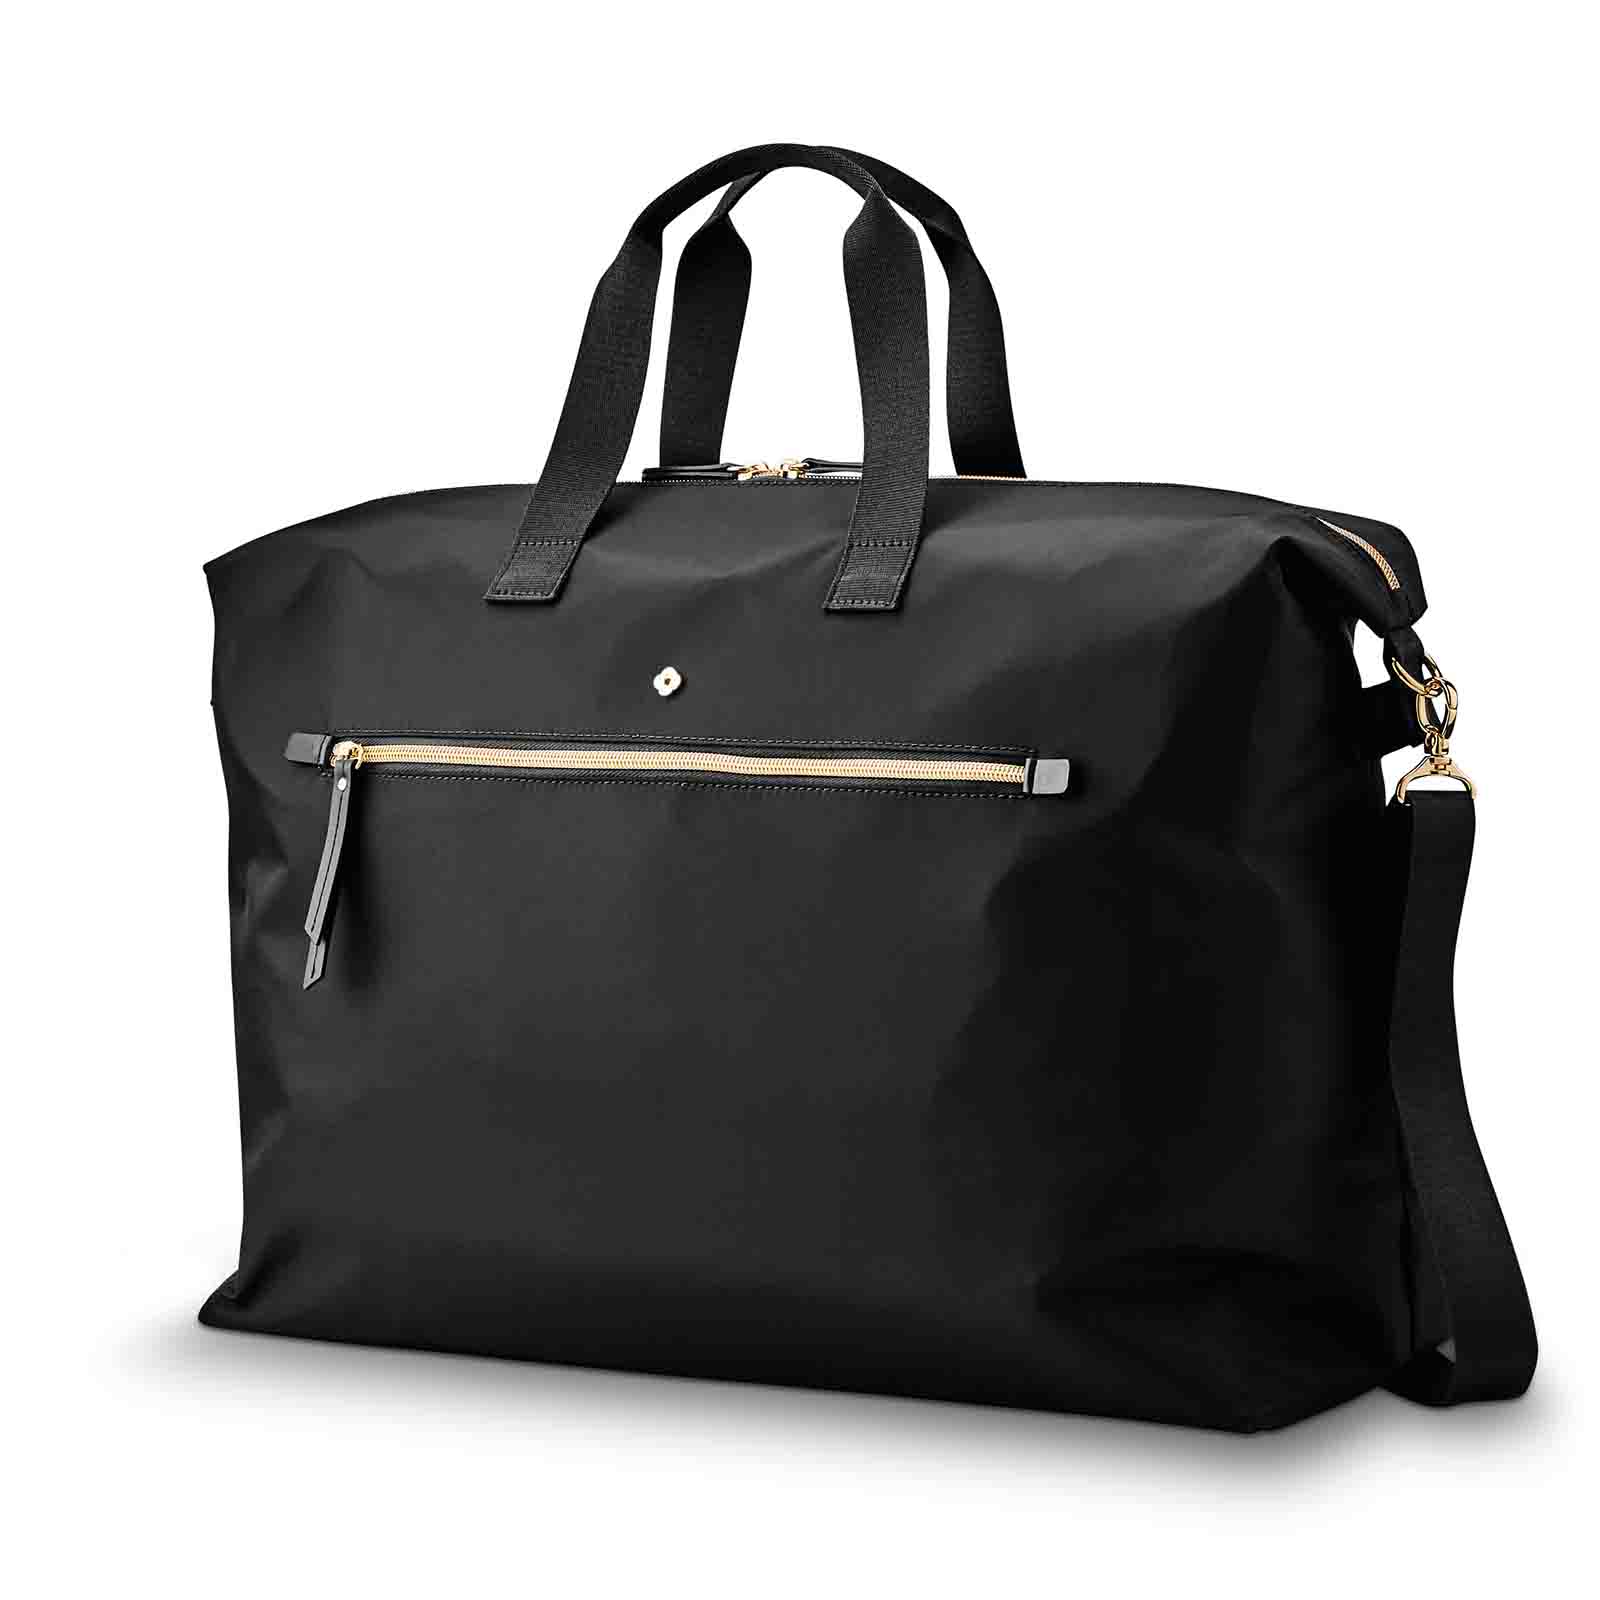 Samsonite-Mobile-Solution-Essential-Classic-Duffle-Black-Front-Angle